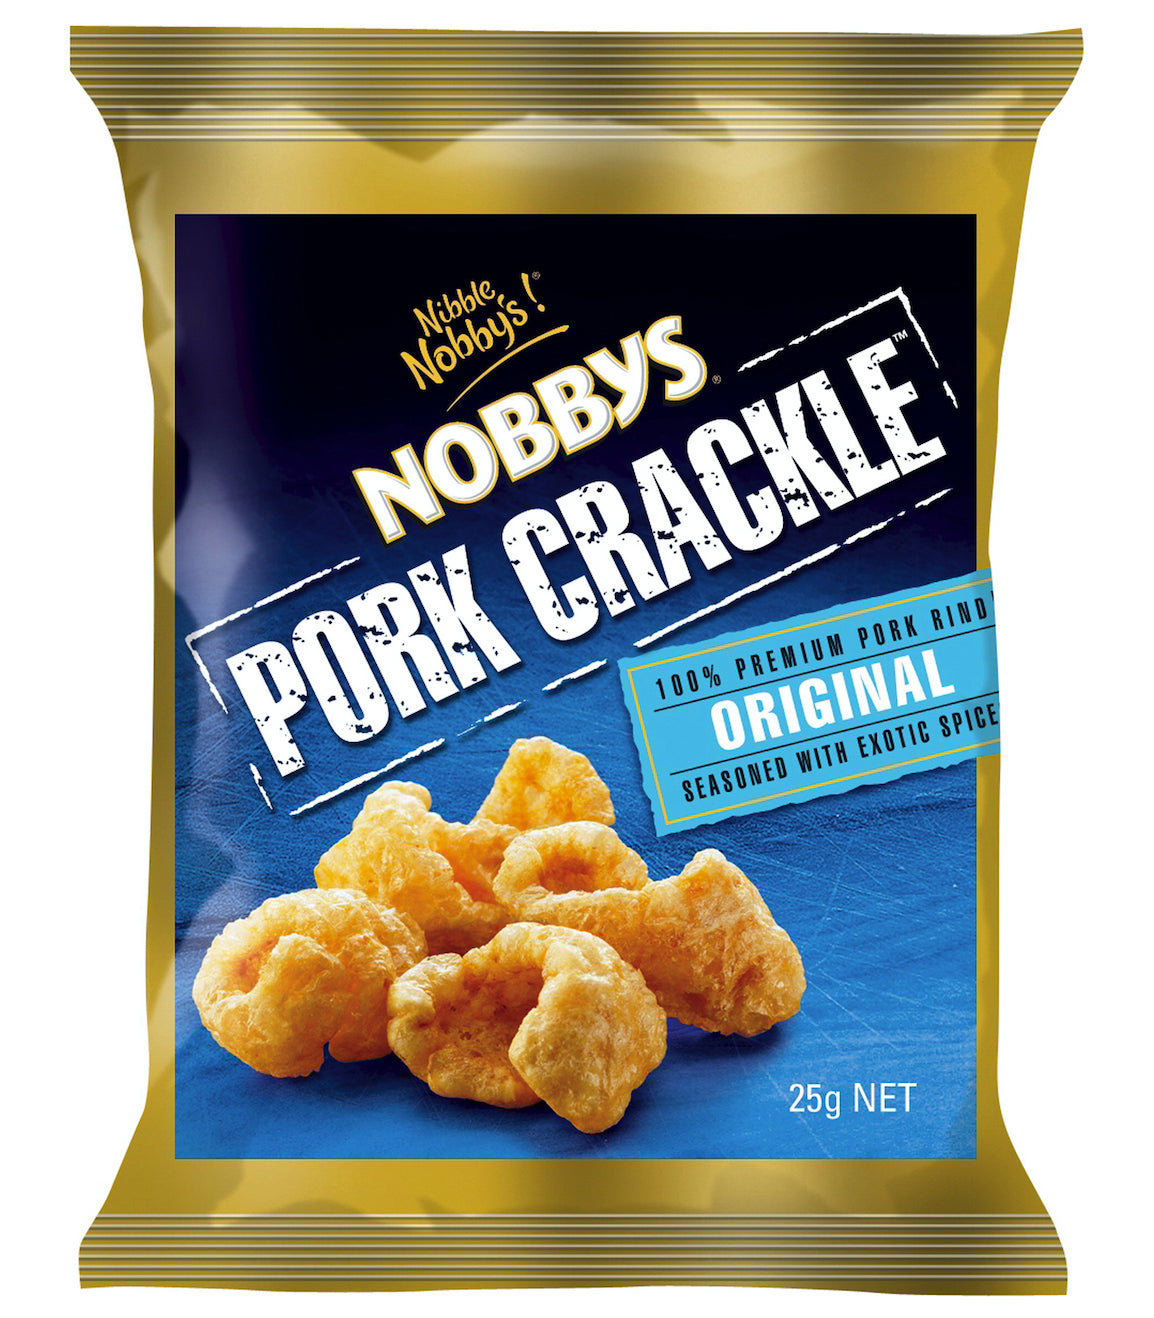 Nobby's Pork Crackle 25g x 5 Packets